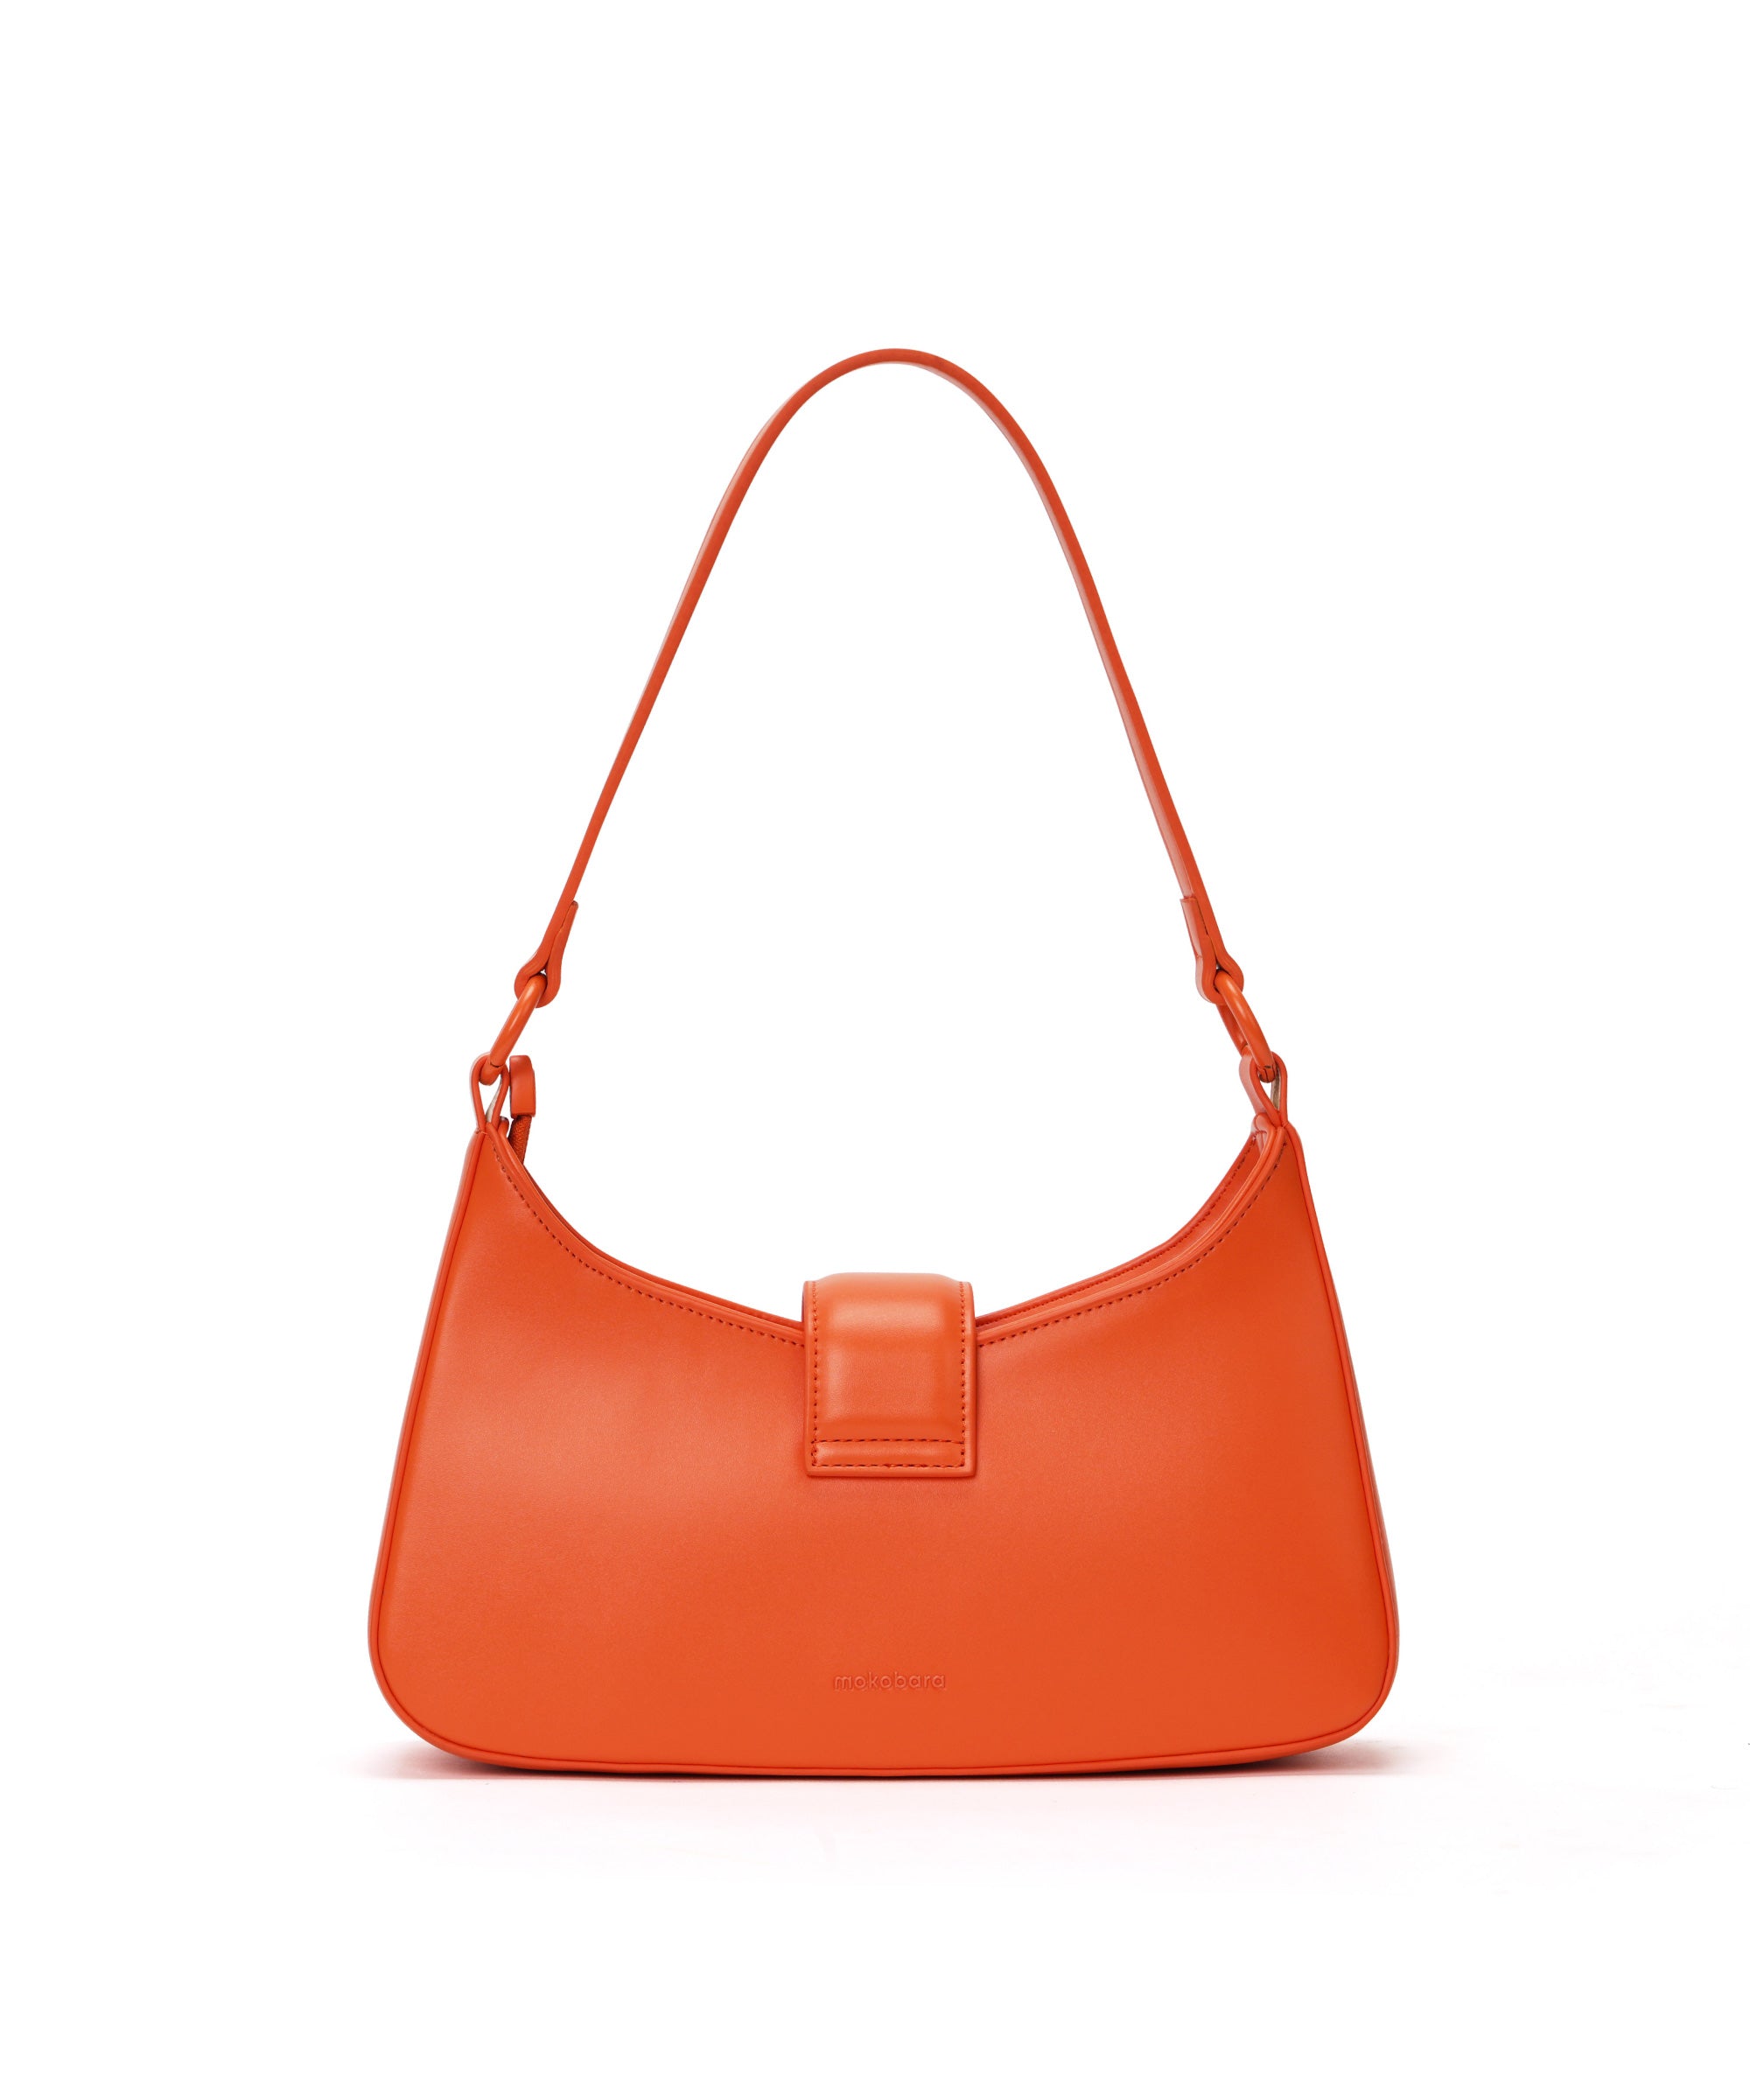 Color_First Date | The Summer Handbag